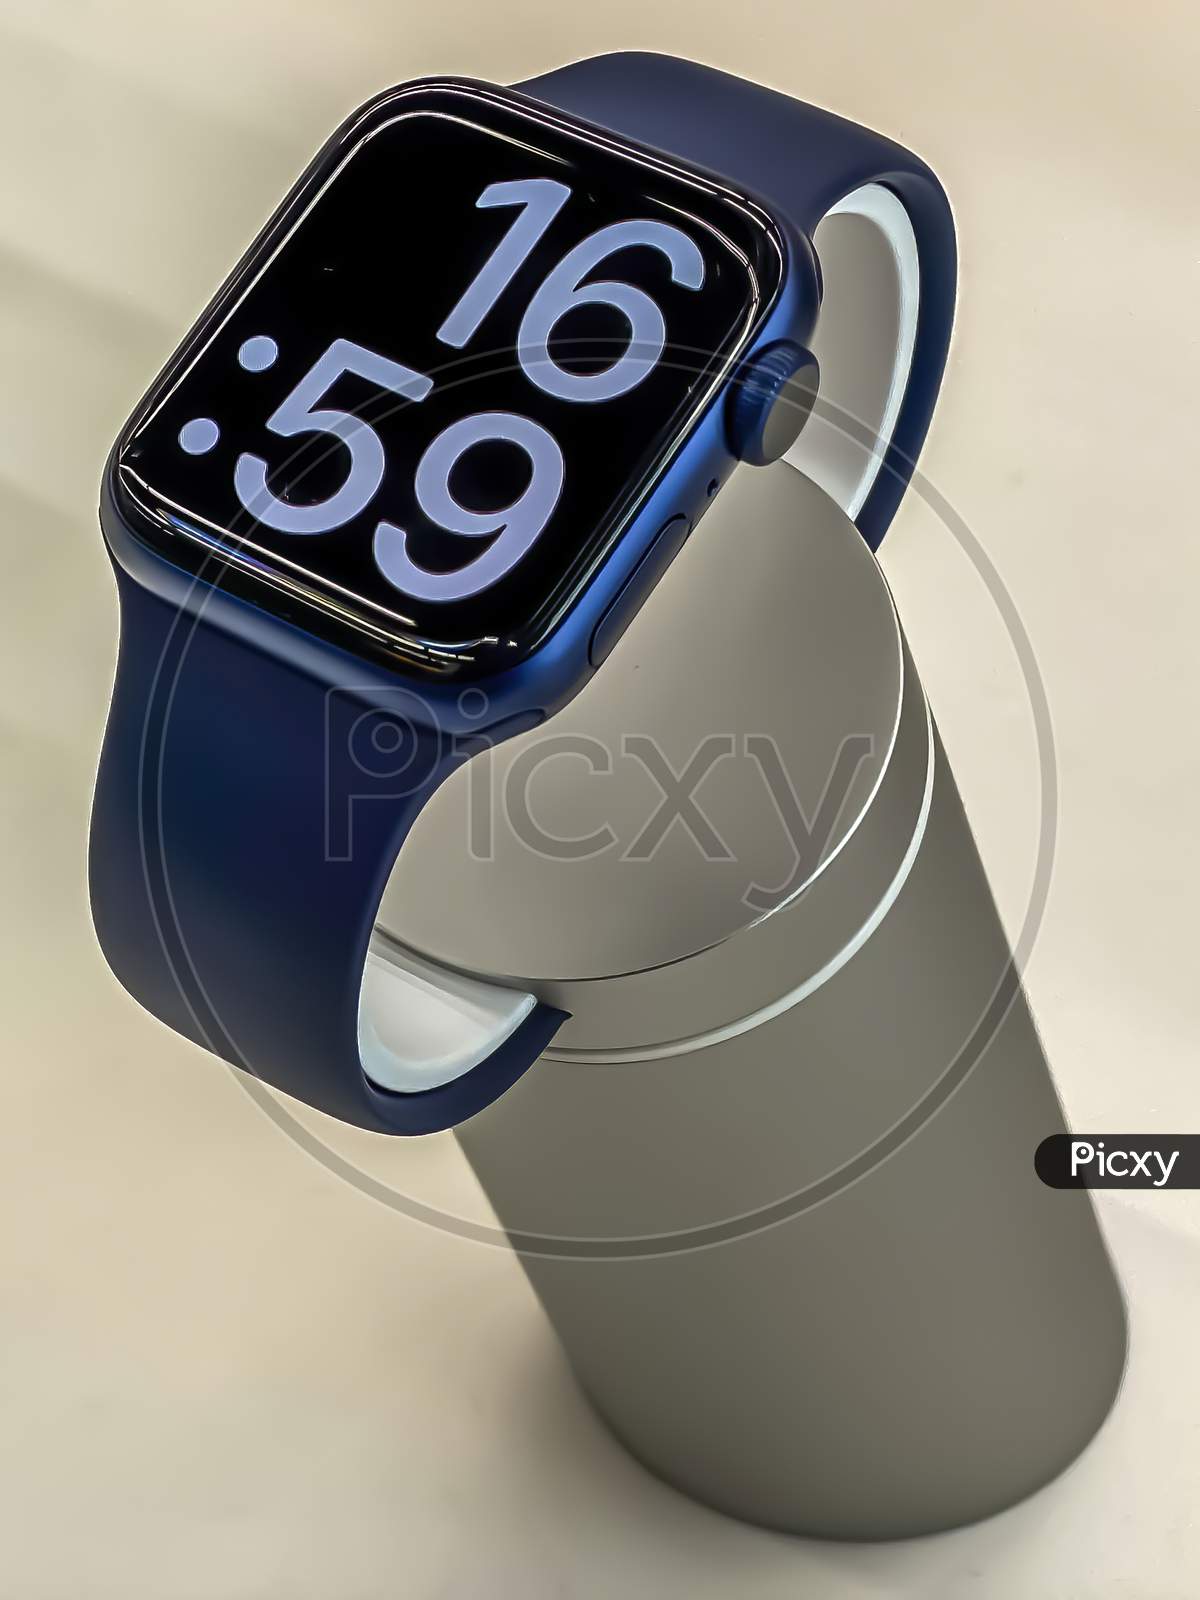 Darmstadt, Germany - September 25th 2020: A photographer visiting a Saturn market taking pictures of the Apple area with the new Apple Watch Series 6 in the new color blue.